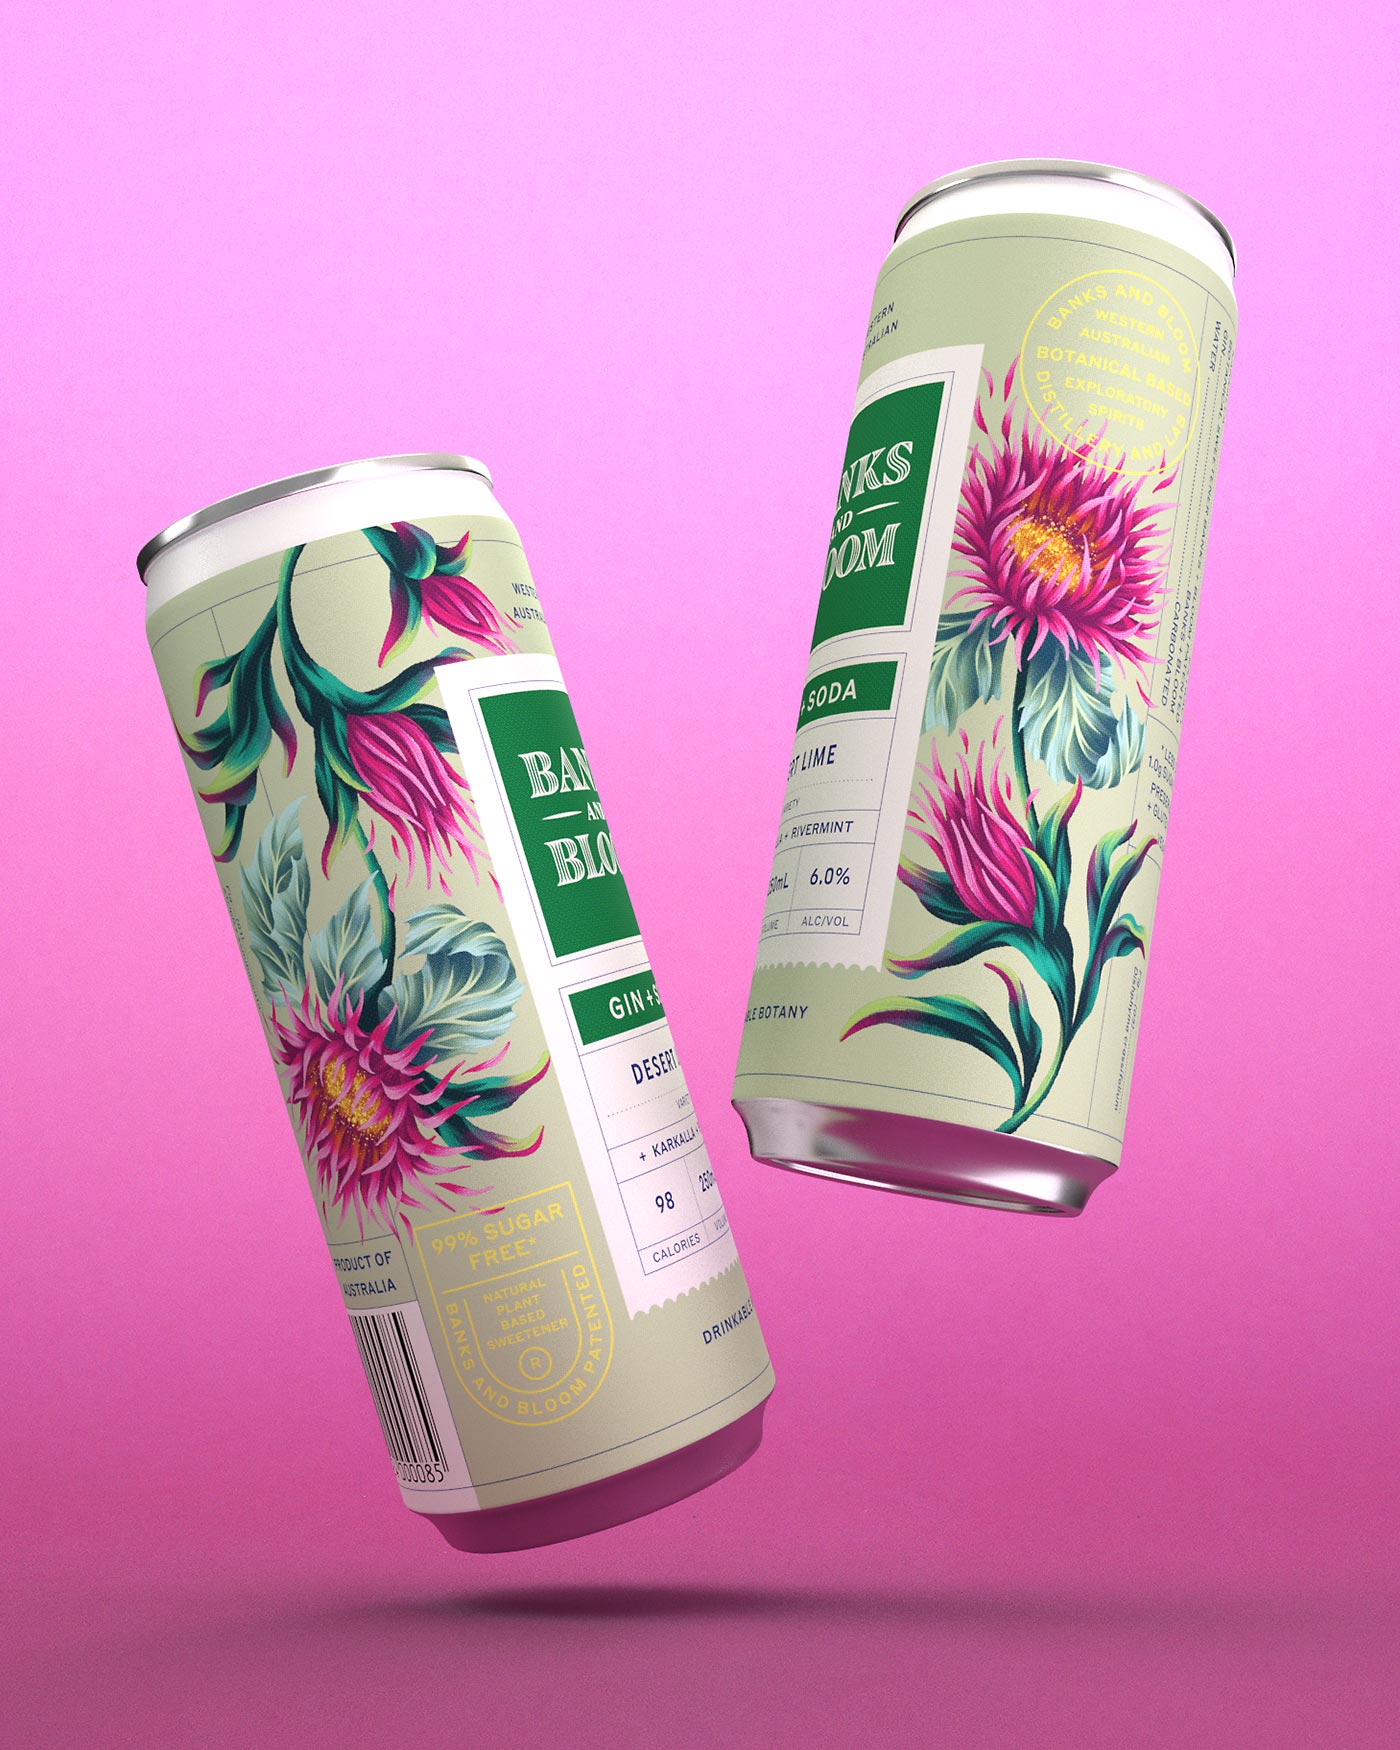 Banks and Bloom Gin and Soda floral artwork RTD can design with pink flowers by Andrea Muller